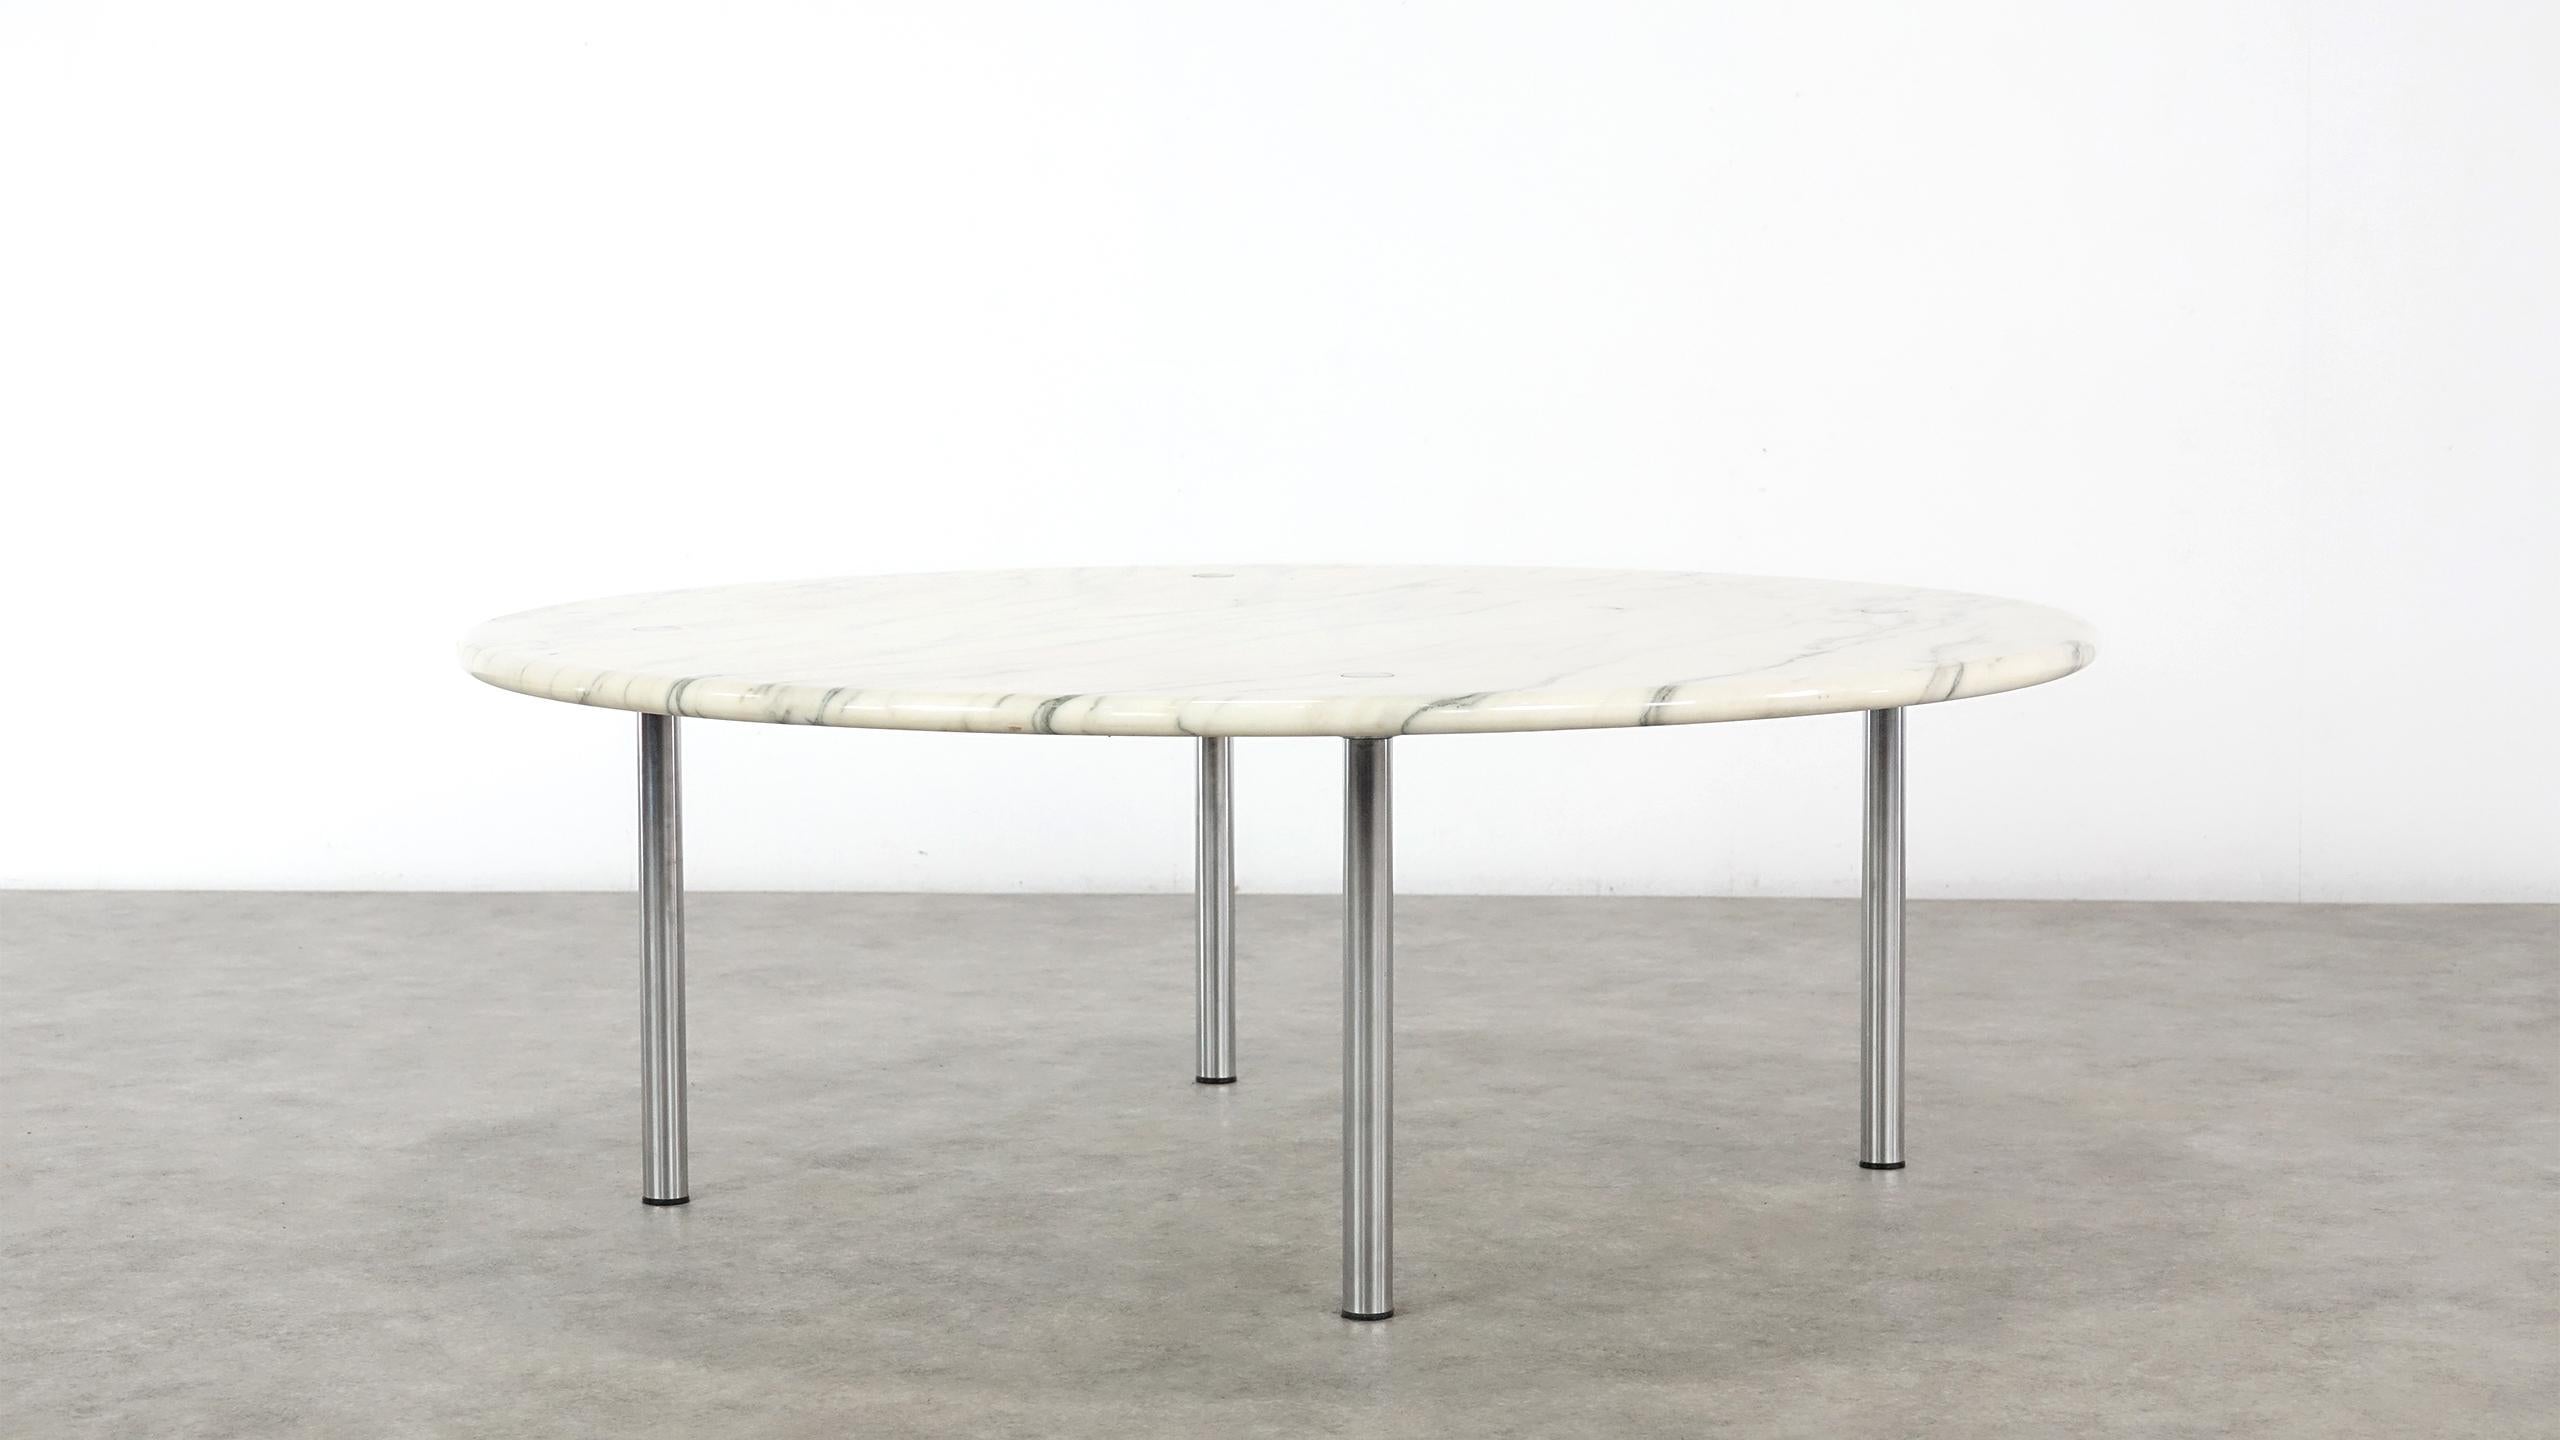 Extraordinary coffee table with Carrara marble top by Erwine & Estelle Laverne for Laverne Int., USA 1954. Marble with chromed legs. Very good condition.